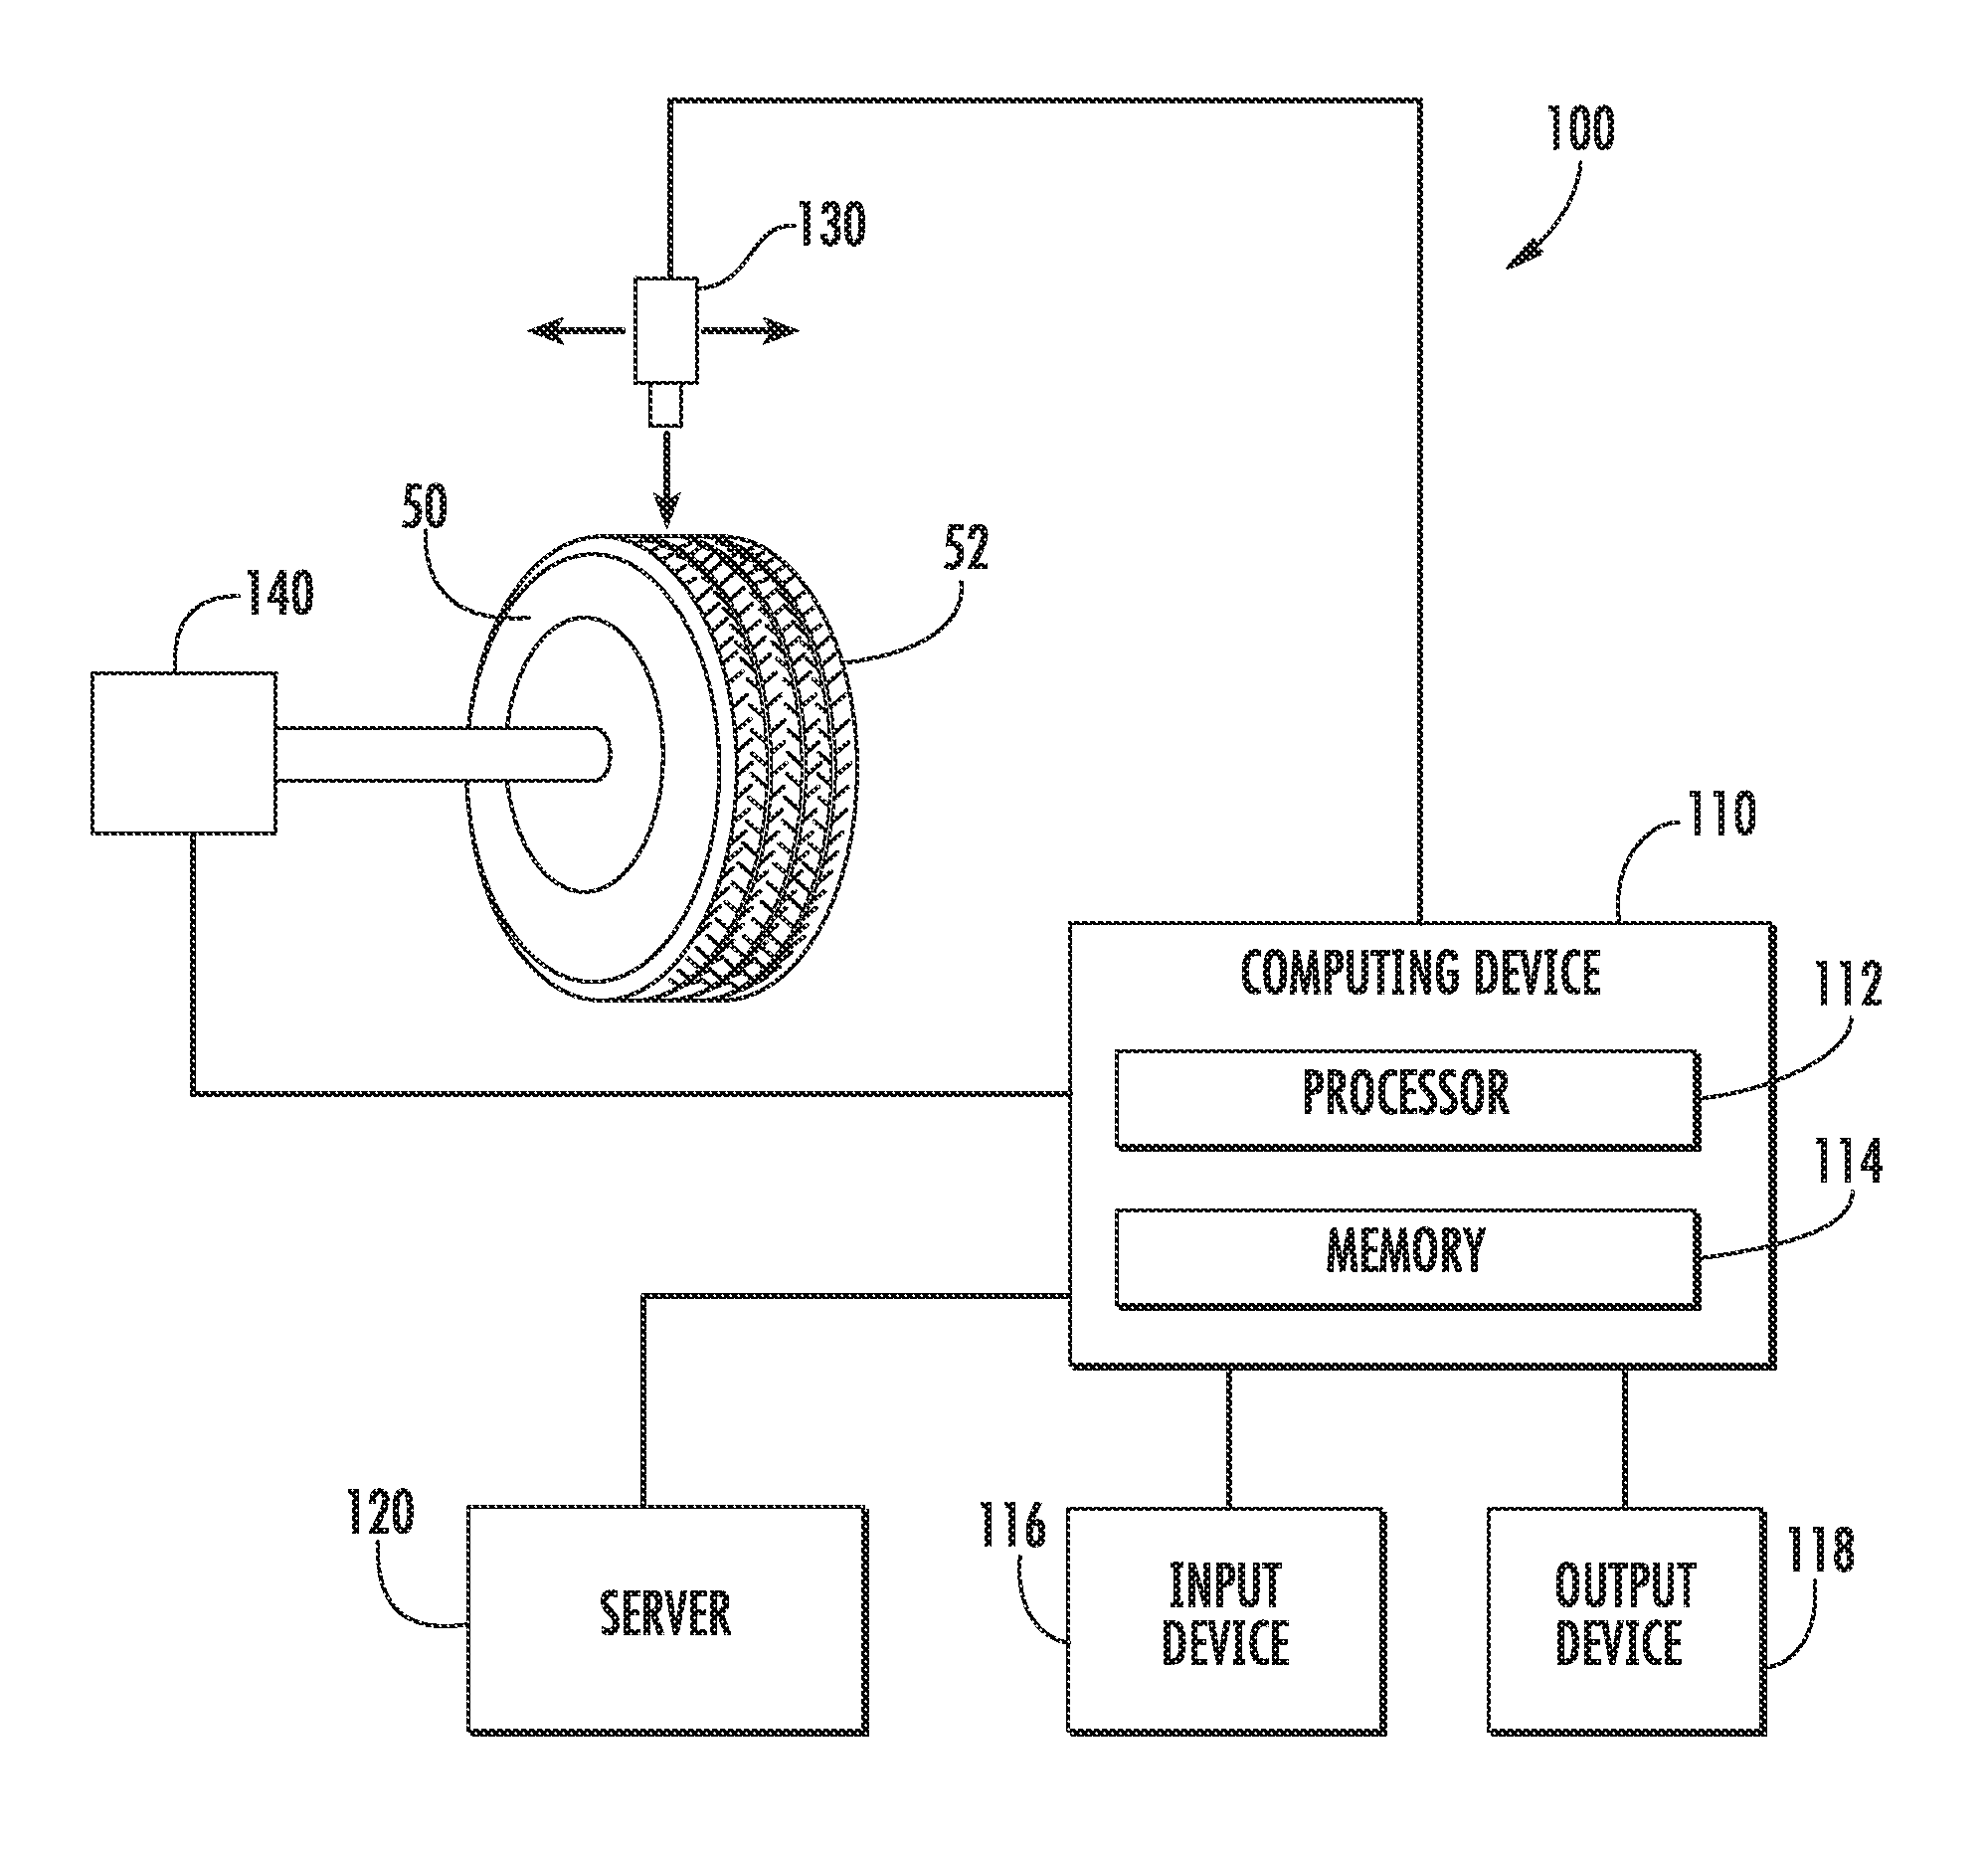 System and Method for Analyzing Tire Tread Parameters